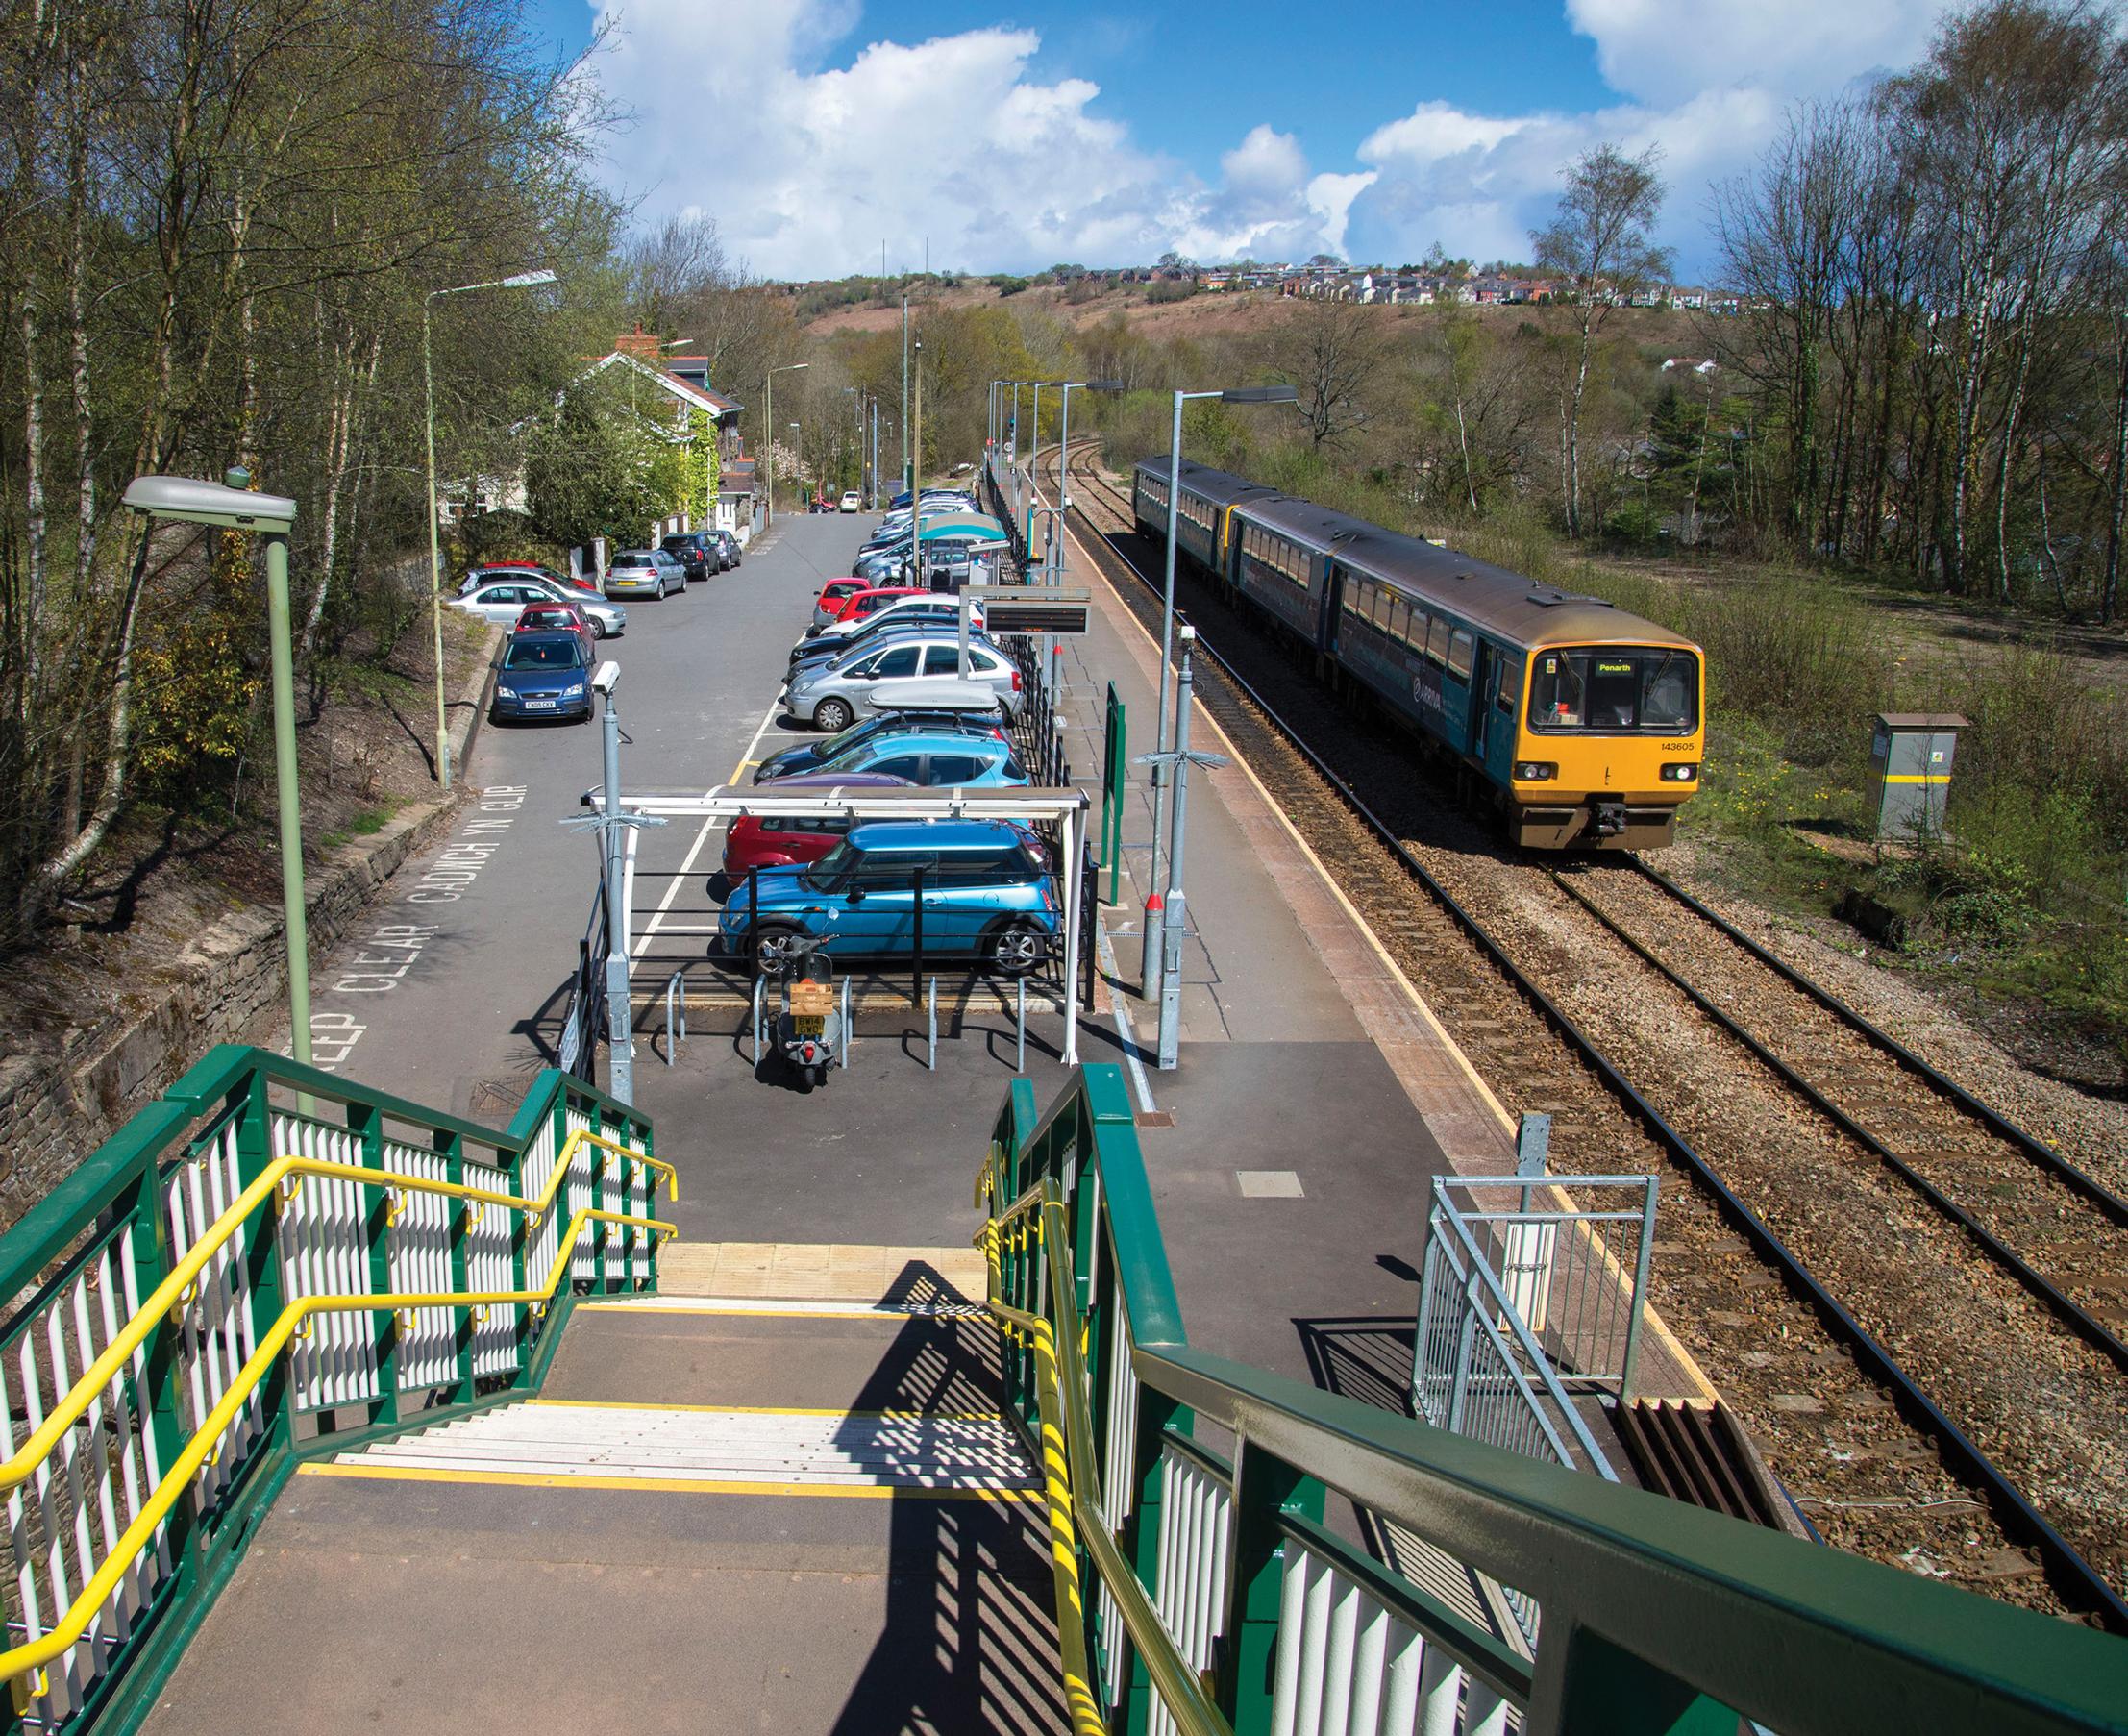 Ystrad Mynach station and the rest of the core Valley Lines infrastructure will transfer from Network Rail to the operator and development partner. Transport for Wales may manage stations and car parks itself